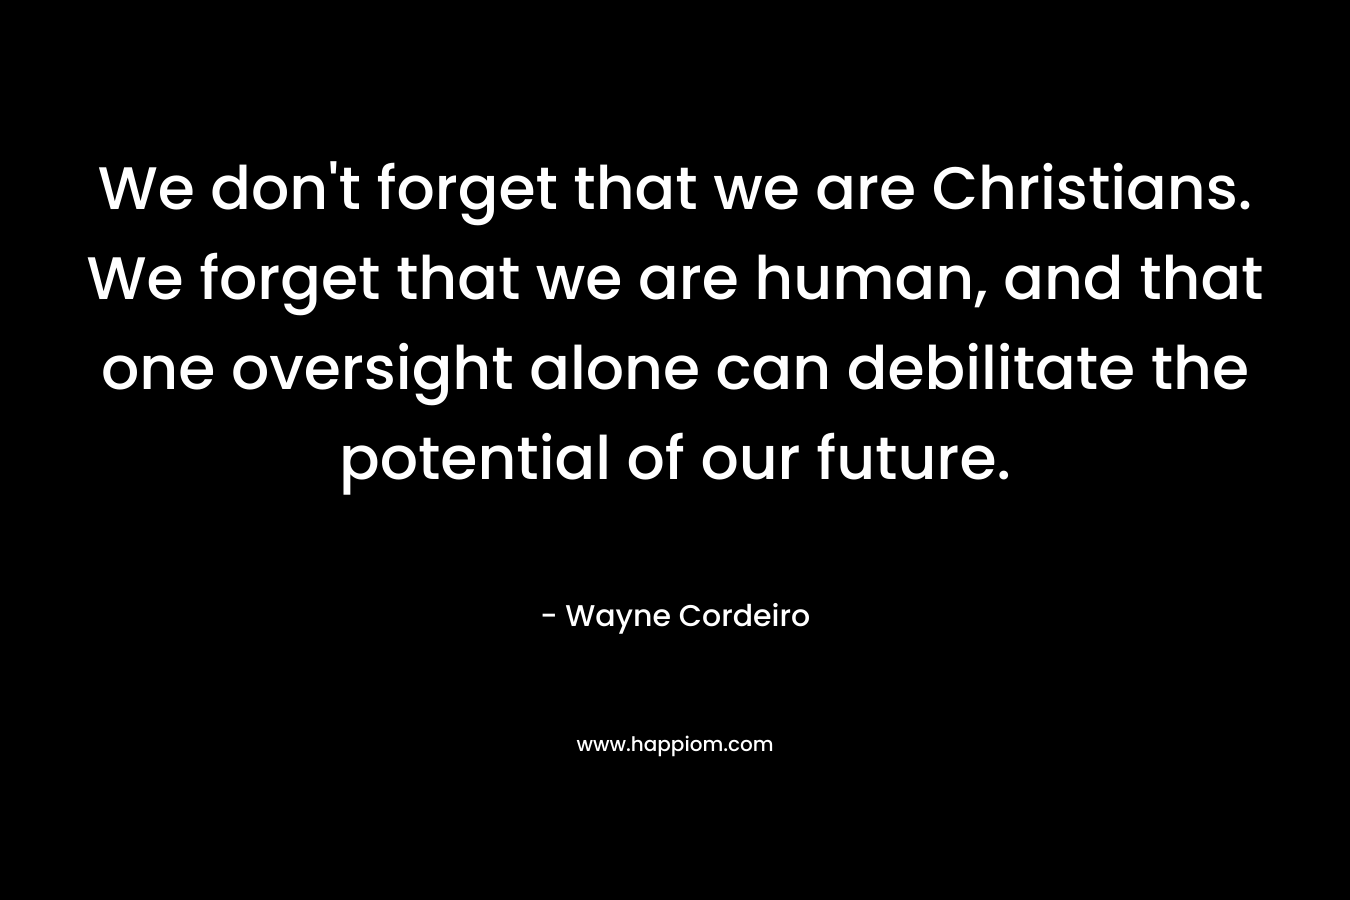 We don’t forget that we are Christians. We forget that we are human, and that one oversight alone can debilitate the potential of our future. – Wayne Cordeiro